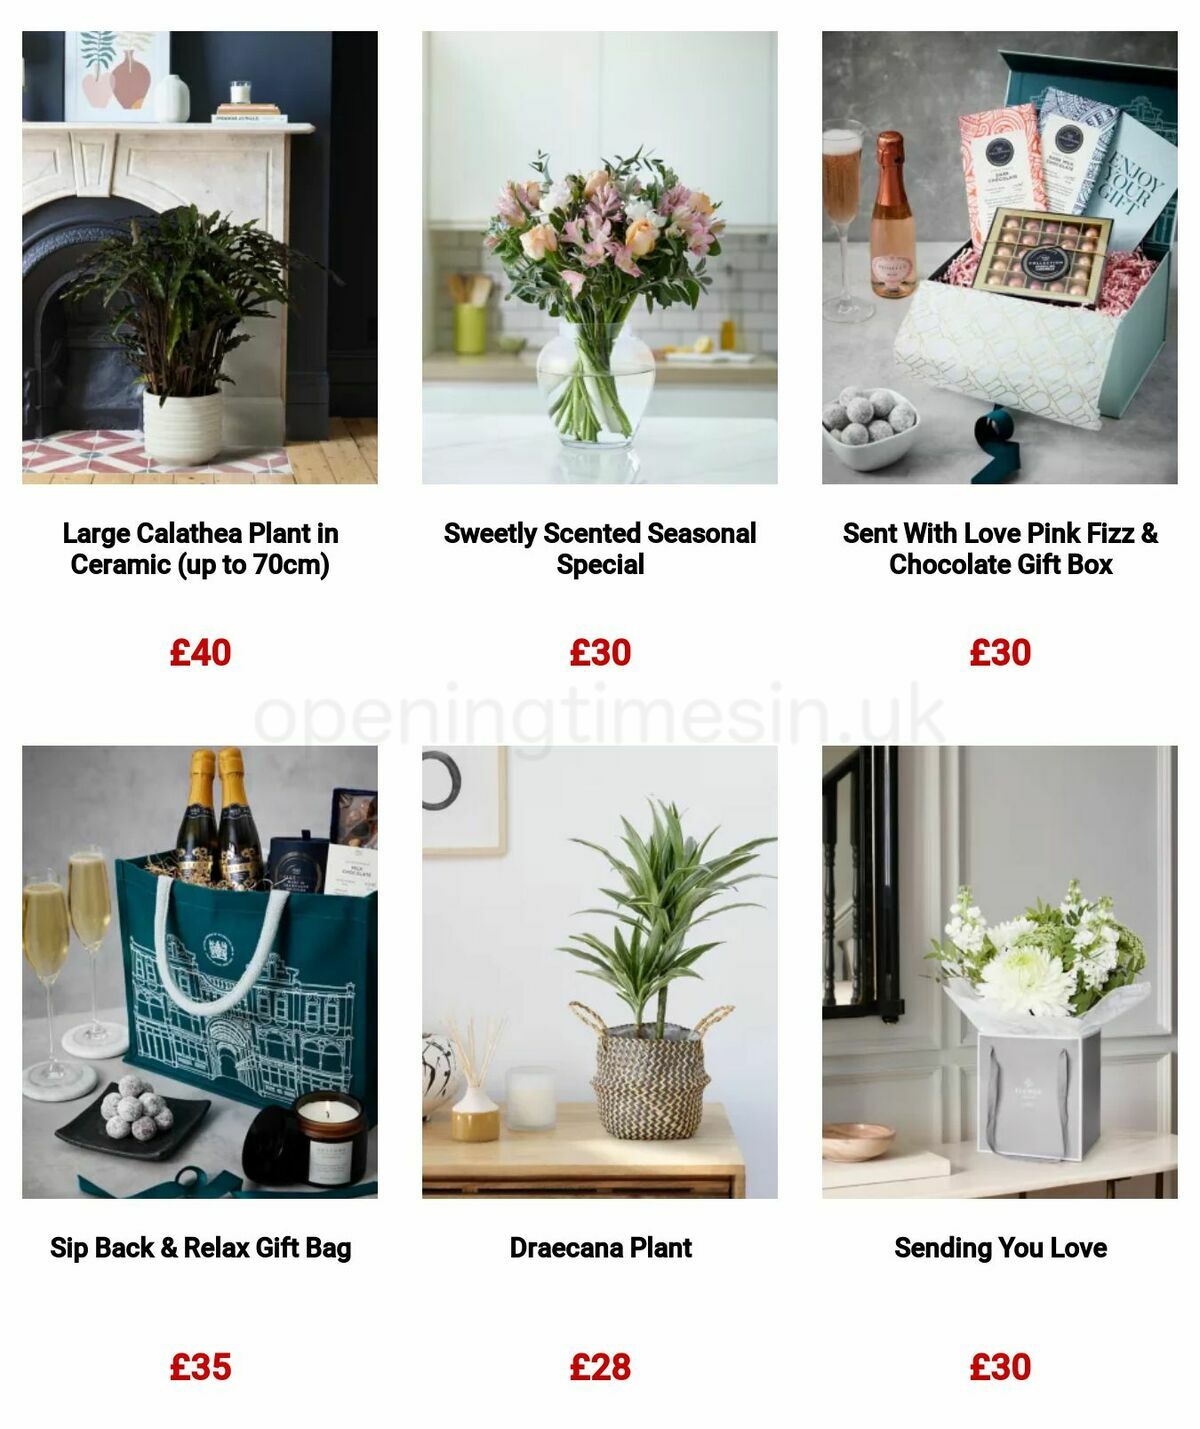 M&S Marks and Spencer Mother's Day Offers from 6 March